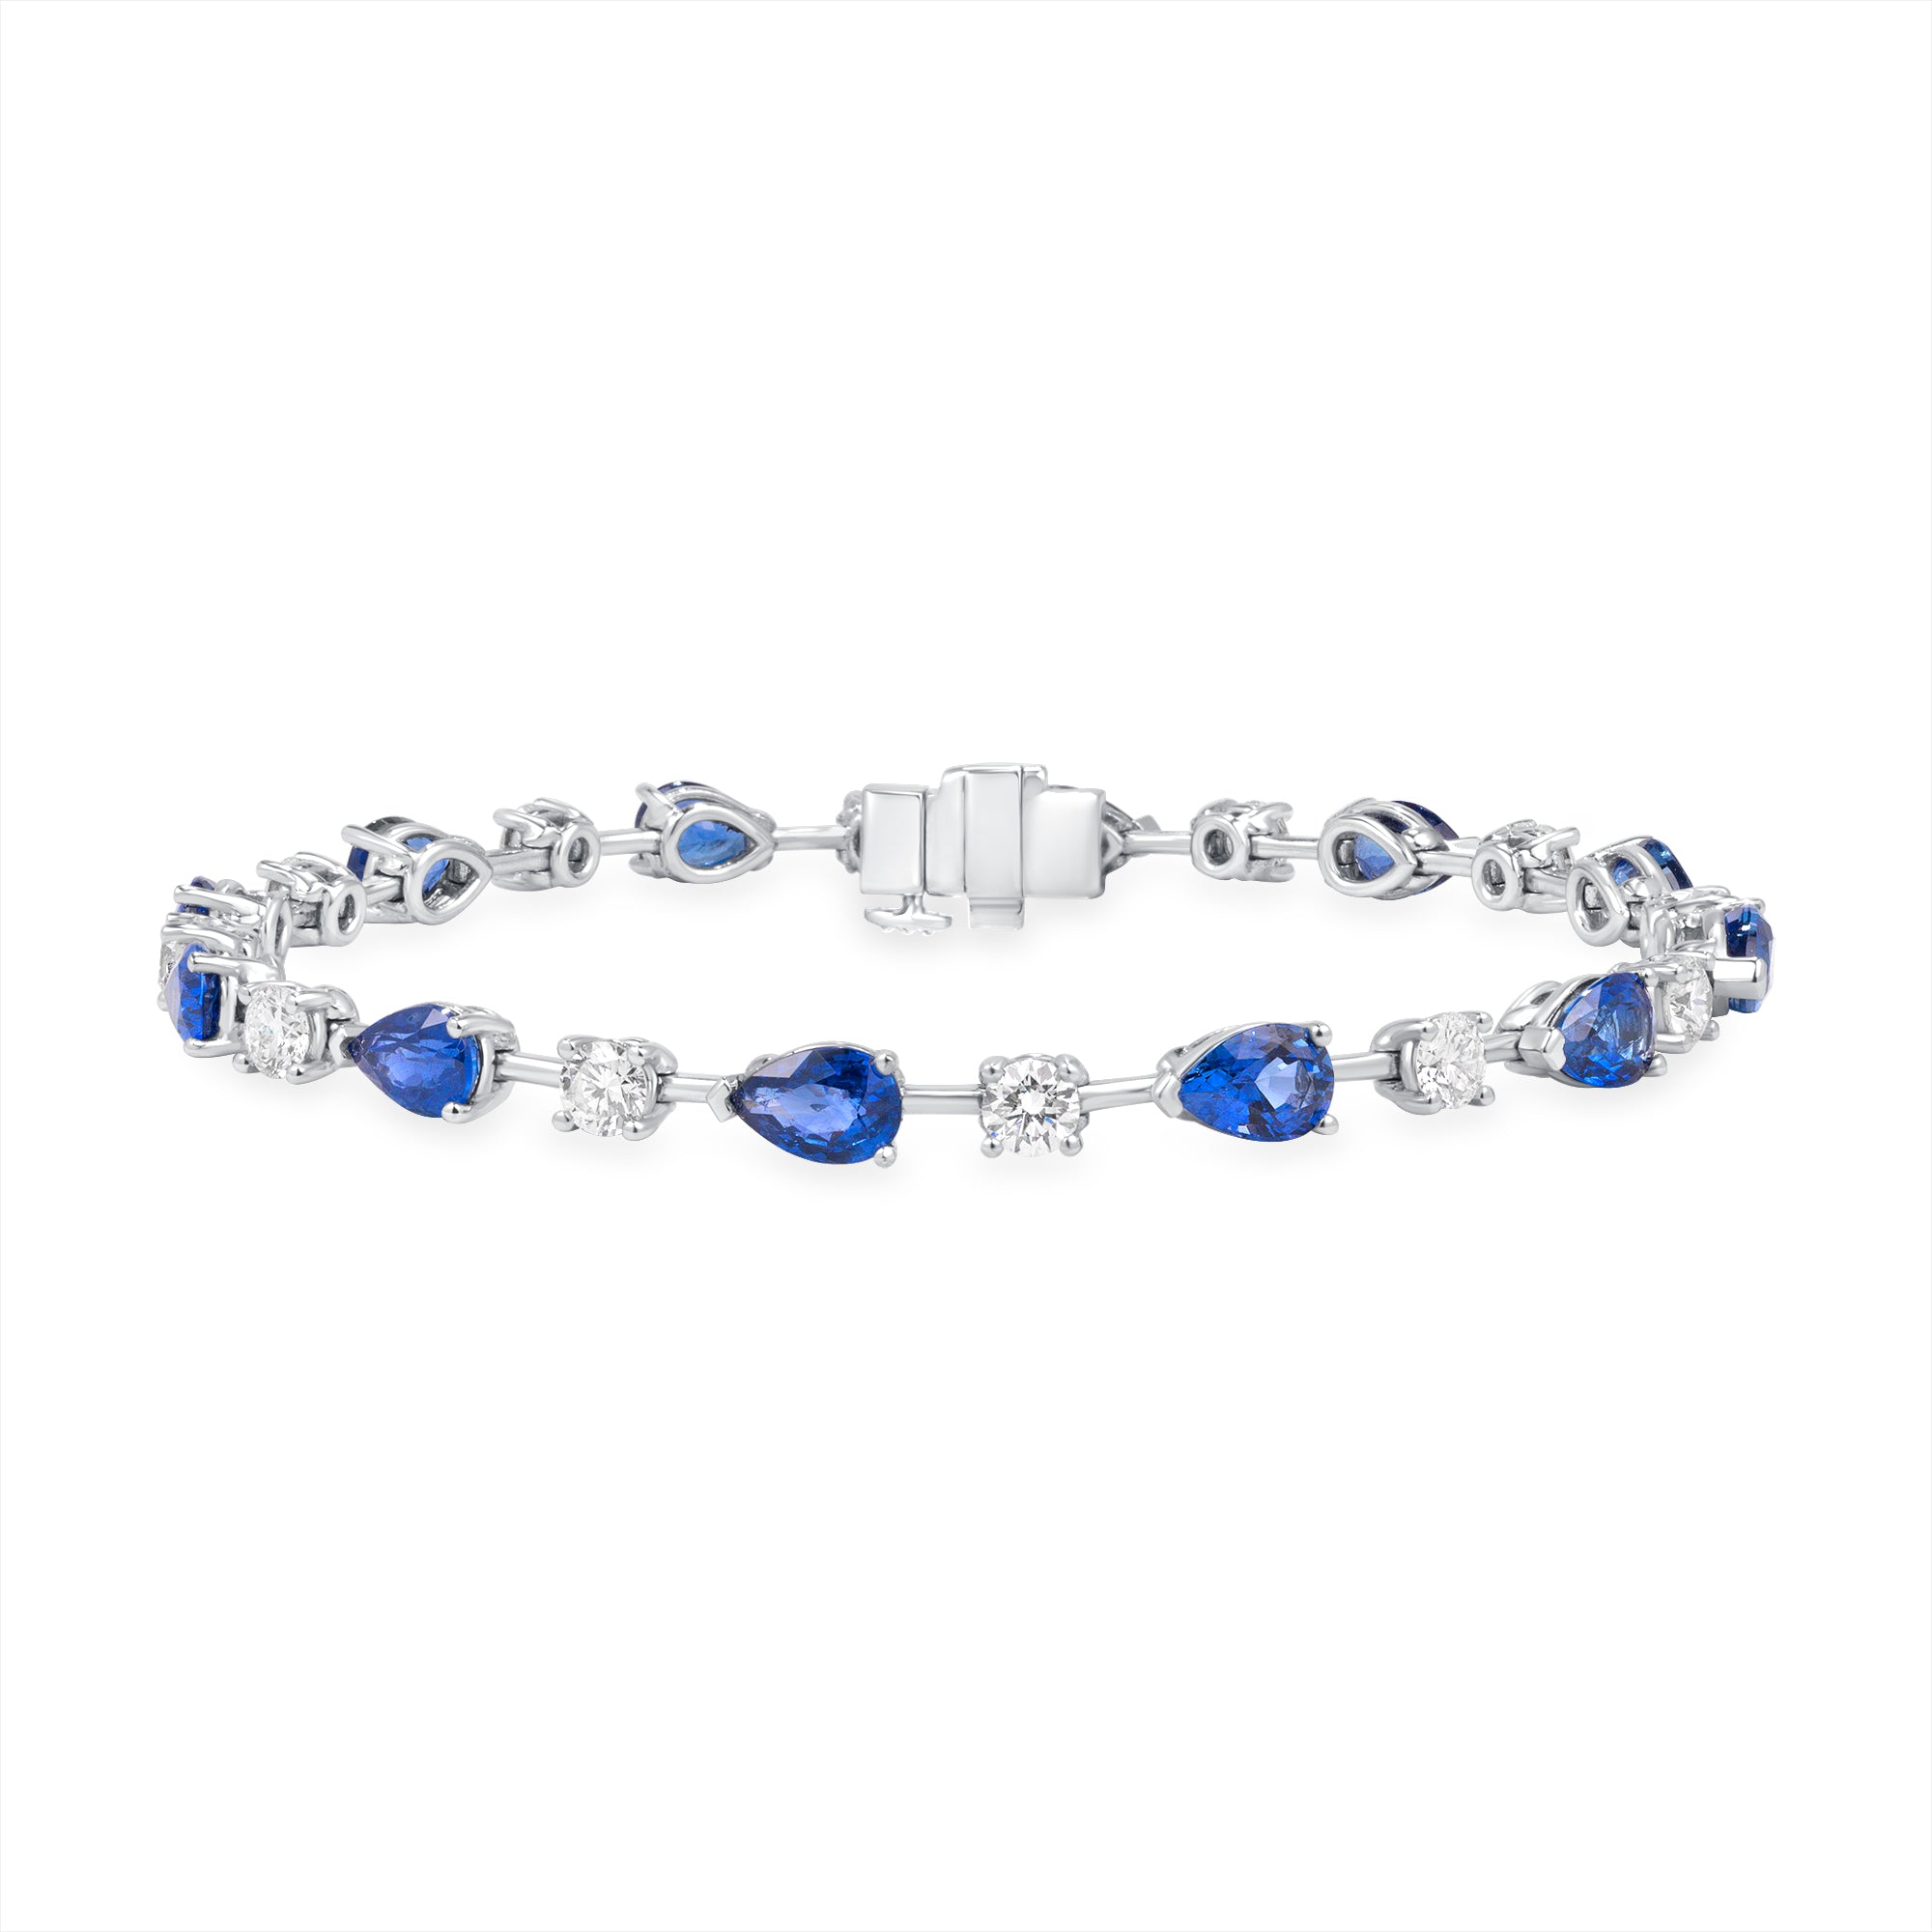 8.31ctw Alternating East-West Pear Cut Sapphire and Round Brilliant Cut Diamond Tennis Bracelet in 18K White Gold